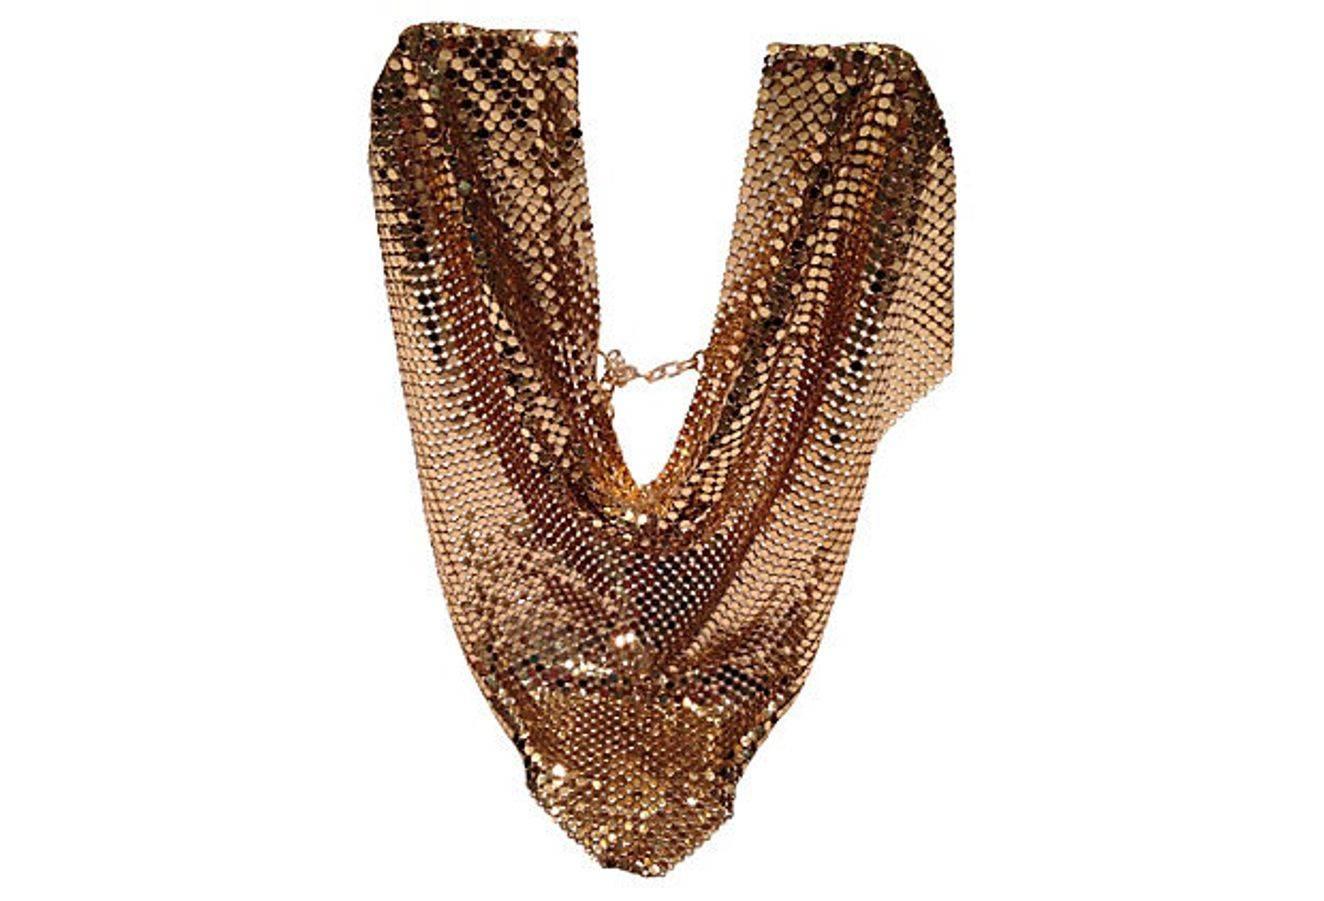 This shimmering coveted and reversible "hot now" gold metal mesh Bib choker necklace by, Whiting & Davis is a must have fashion staple! Dress it up or dress it down, there is nothing it won’t compliment. With an adjustable hook